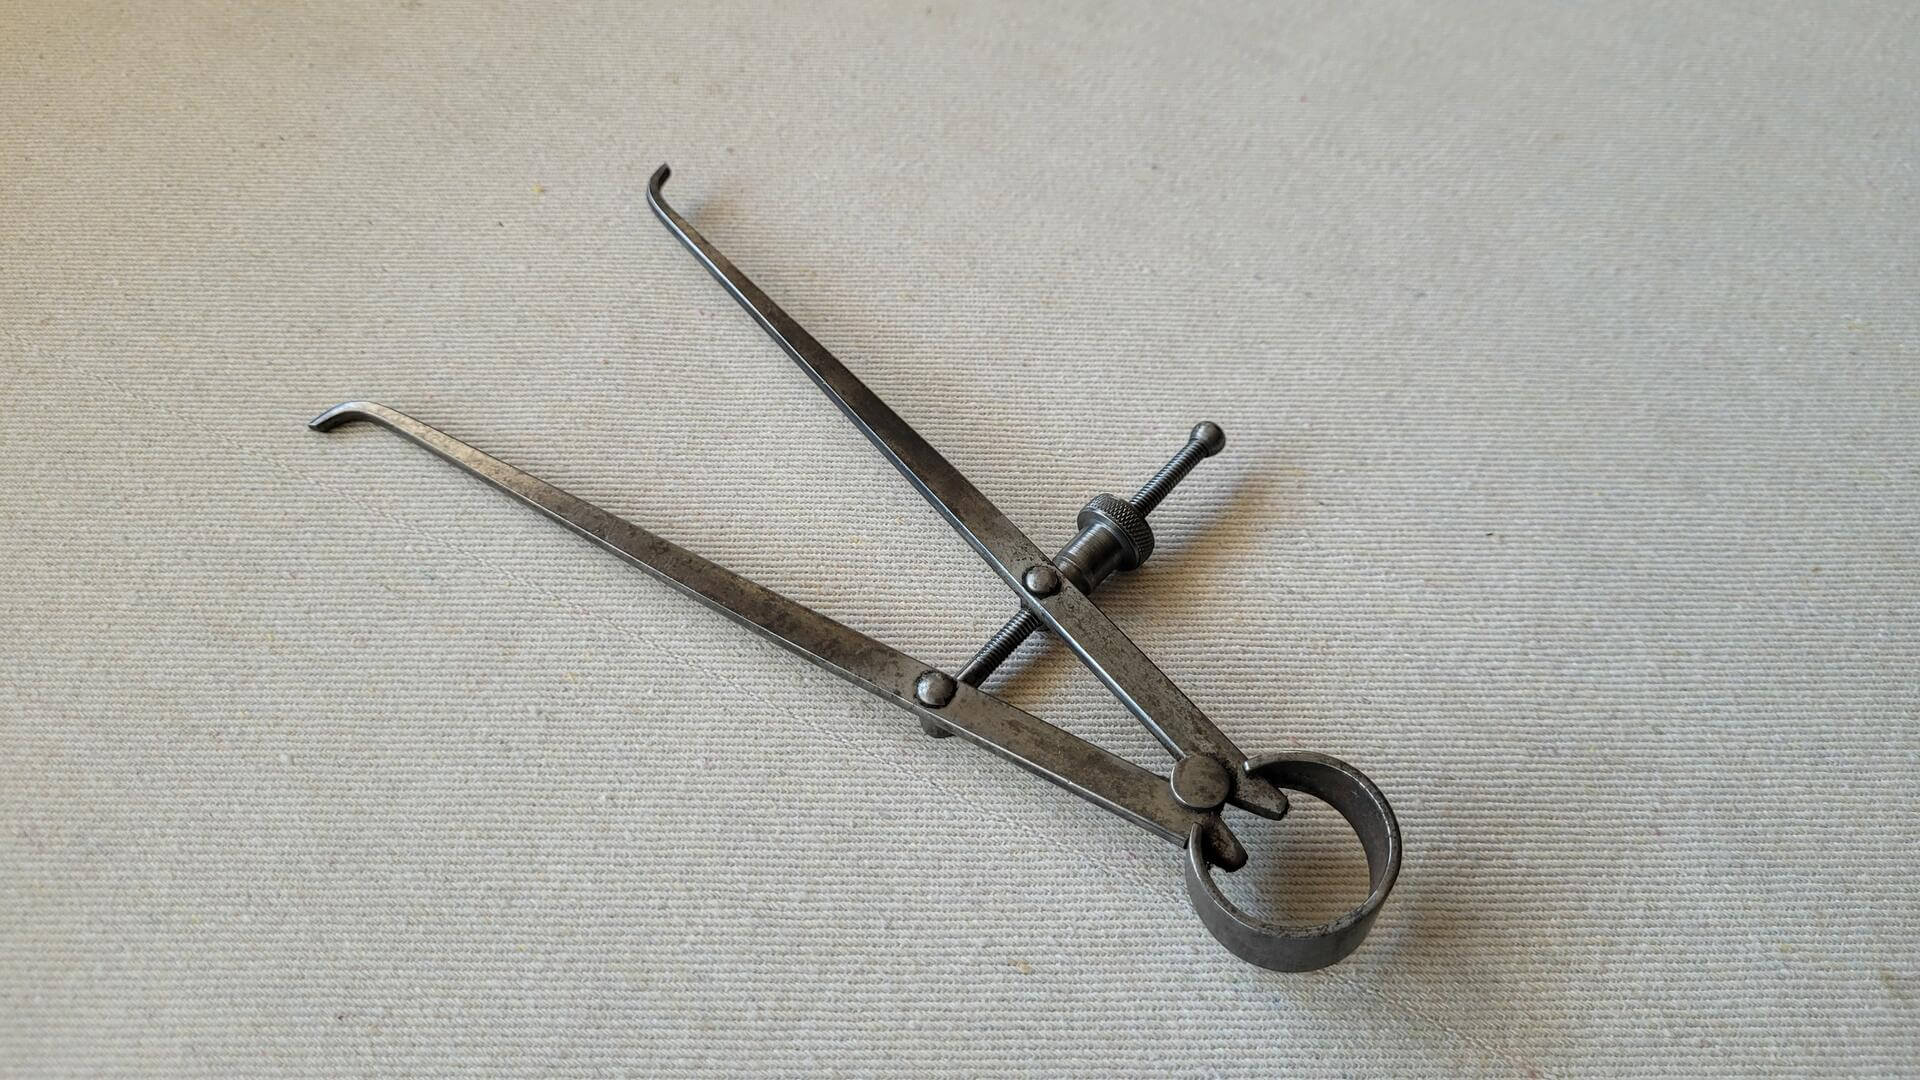 Vintage adjustable spring outside caliper divider by Union Tool Co from Orange, Mass. Collectible made in USA carpenter machinist marking & measuring tool